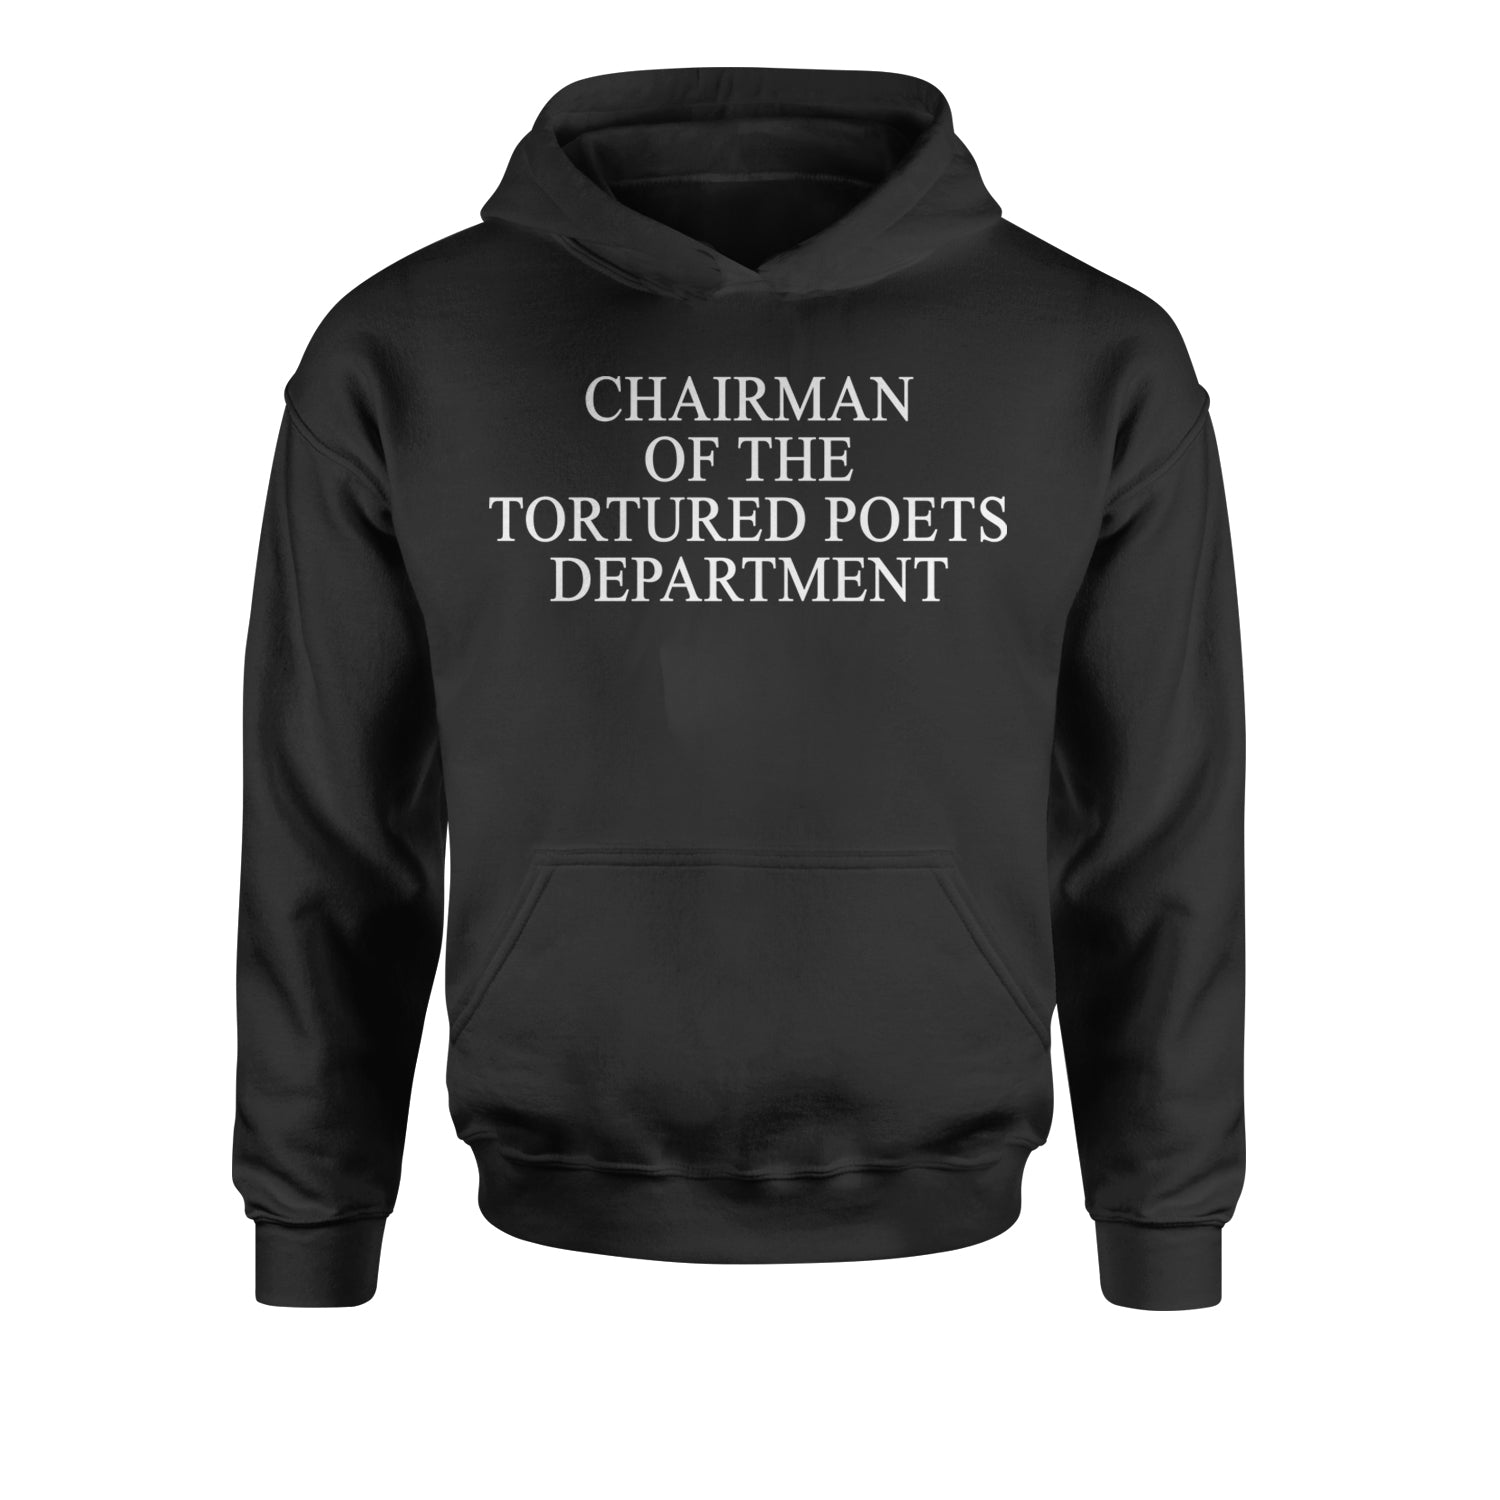 Chairman Of The Tortured Poets Department Youth-Sized Hoodie